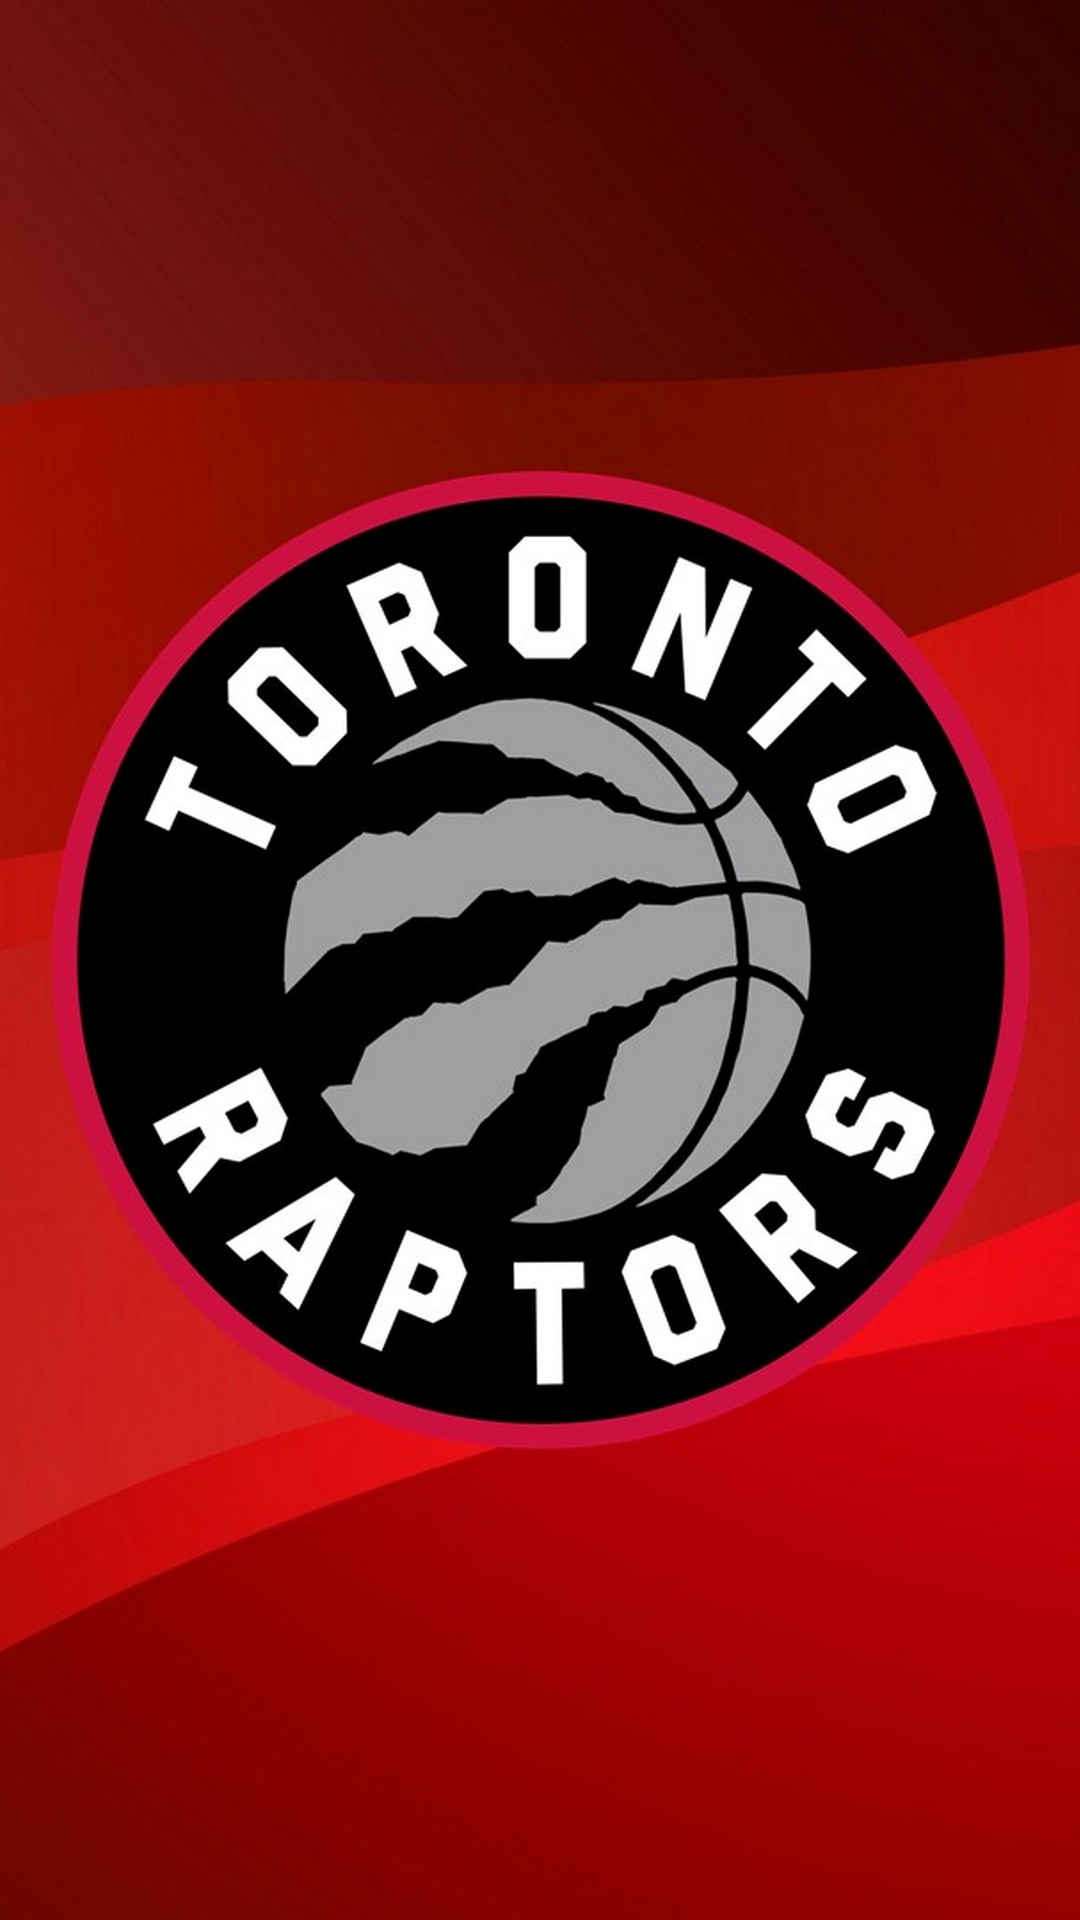 Toronto Raptors iPhone 6 Wallpaper With high-resolution 1080X1920 pixel. You can use this wallpaper for your iPhone 5, 6, 7, 8, X, XS, XR backgrounds, Mobile Screensaver, or iPad Lock Screen